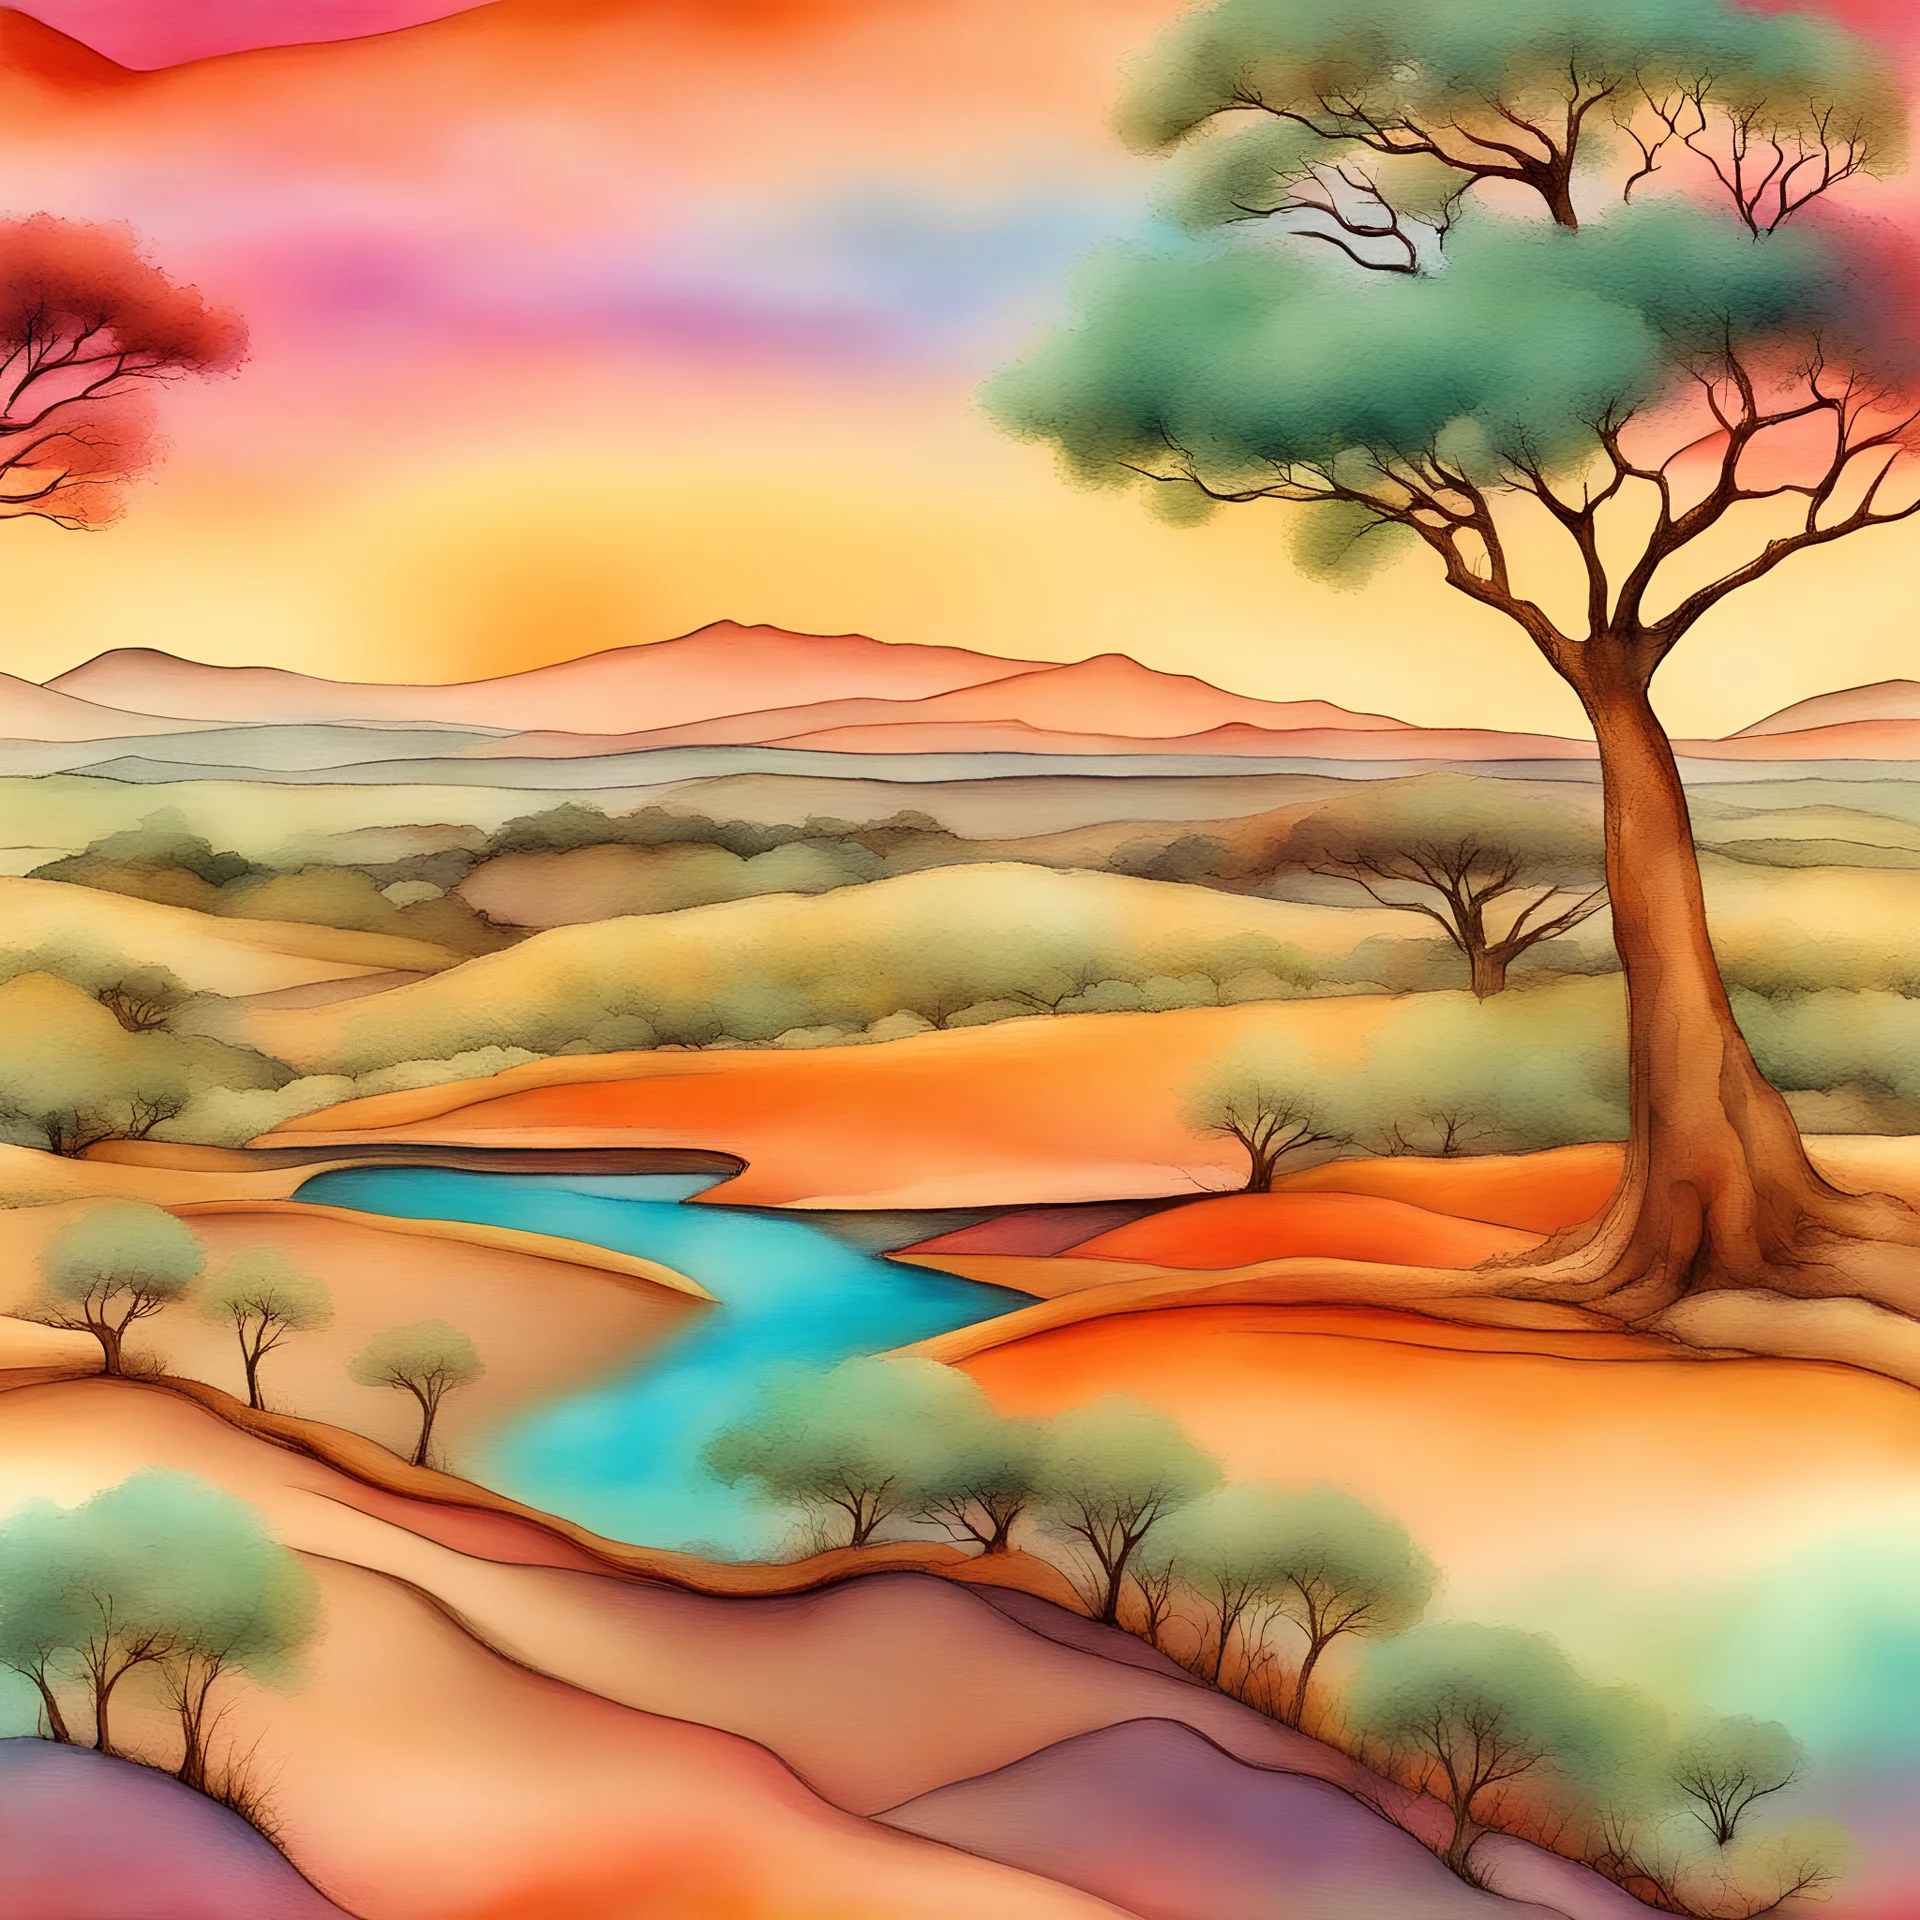 Colorful abstract landscape Serene and peaceful scene like a paradise of an African savanna with boabab trees, A meandering river flowing down the mountain in gentle curves, summer sunset 3d watercolor alcohol ink splash art